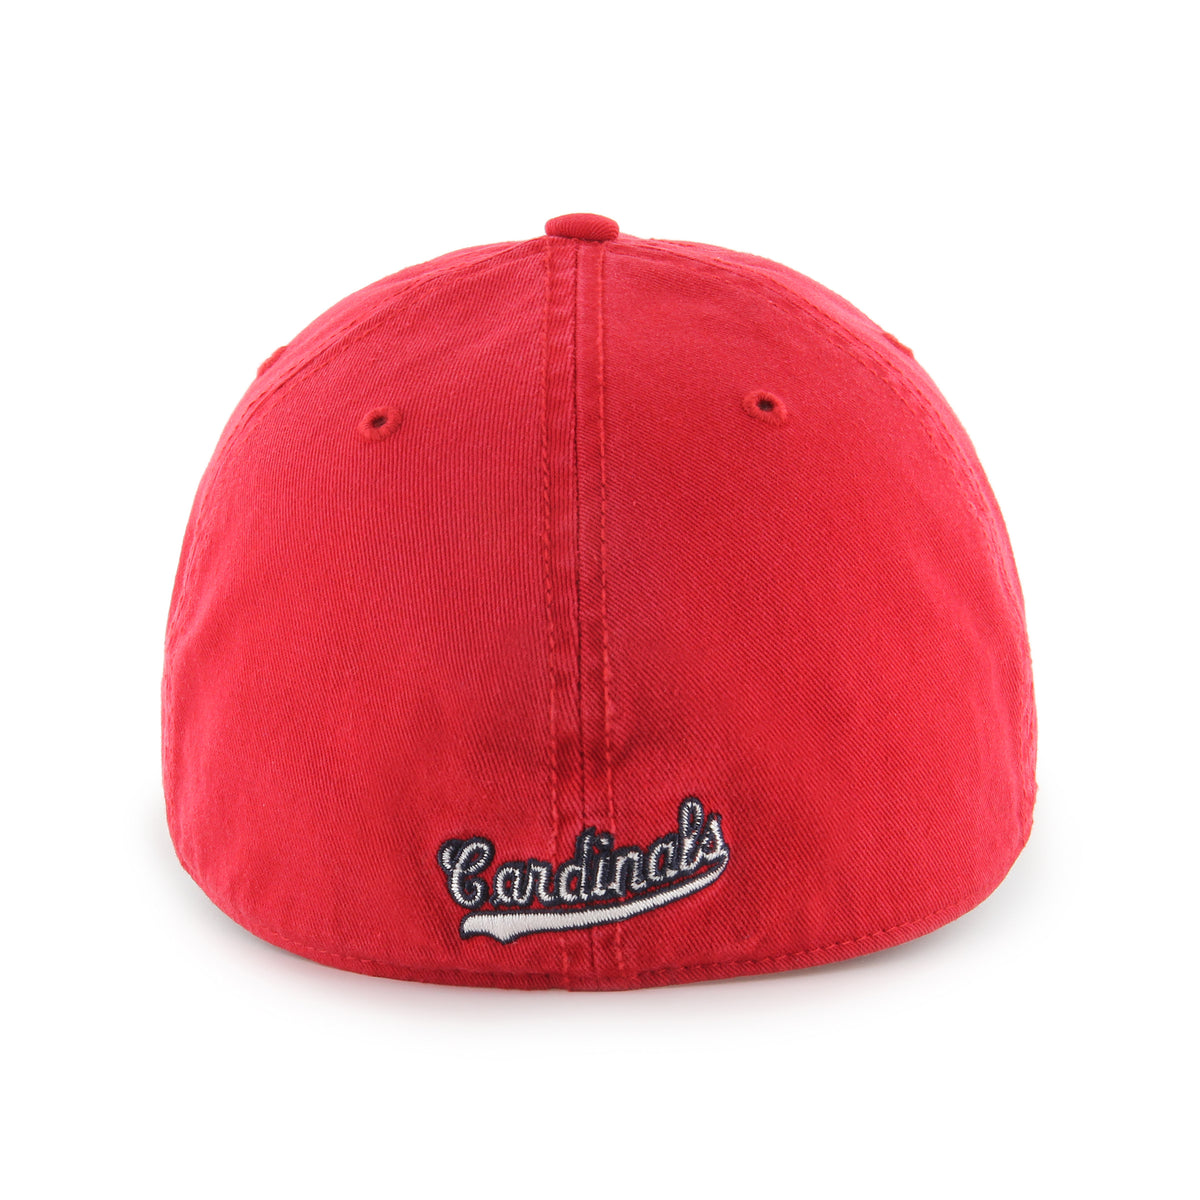 ST. LOUIS CARDINALS COOPERSTOWN CLASSIC '47 FRANCHISE